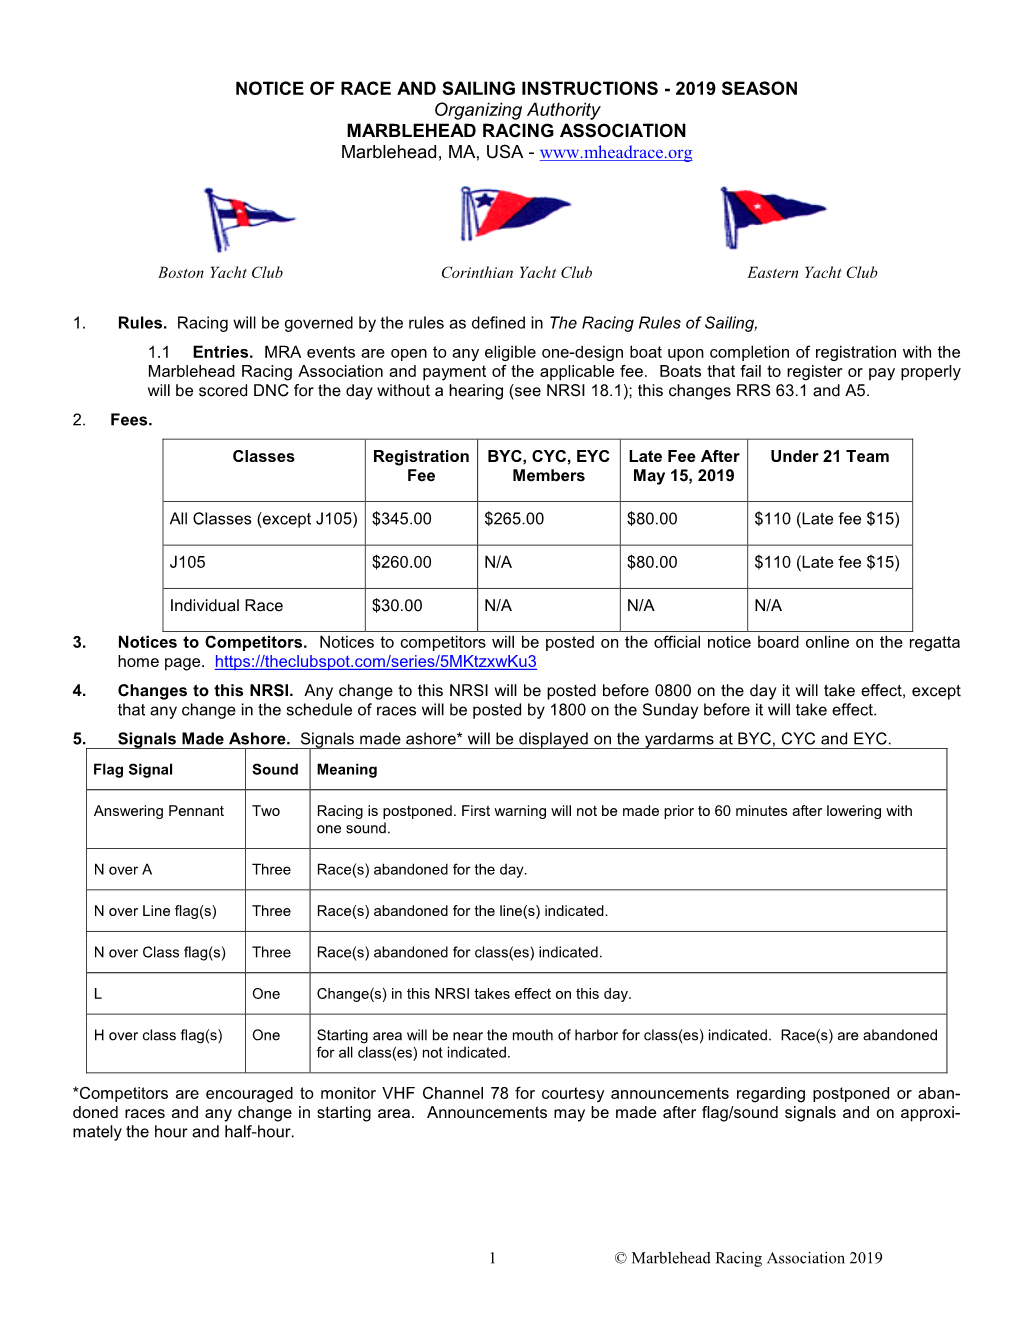 NOTICE of RACE and SAILING INSTRUCTIONS - 2019 SEASON Organizing Authority MARBLEHEAD RACING ASSOCIATION Marblehead, MA, USA